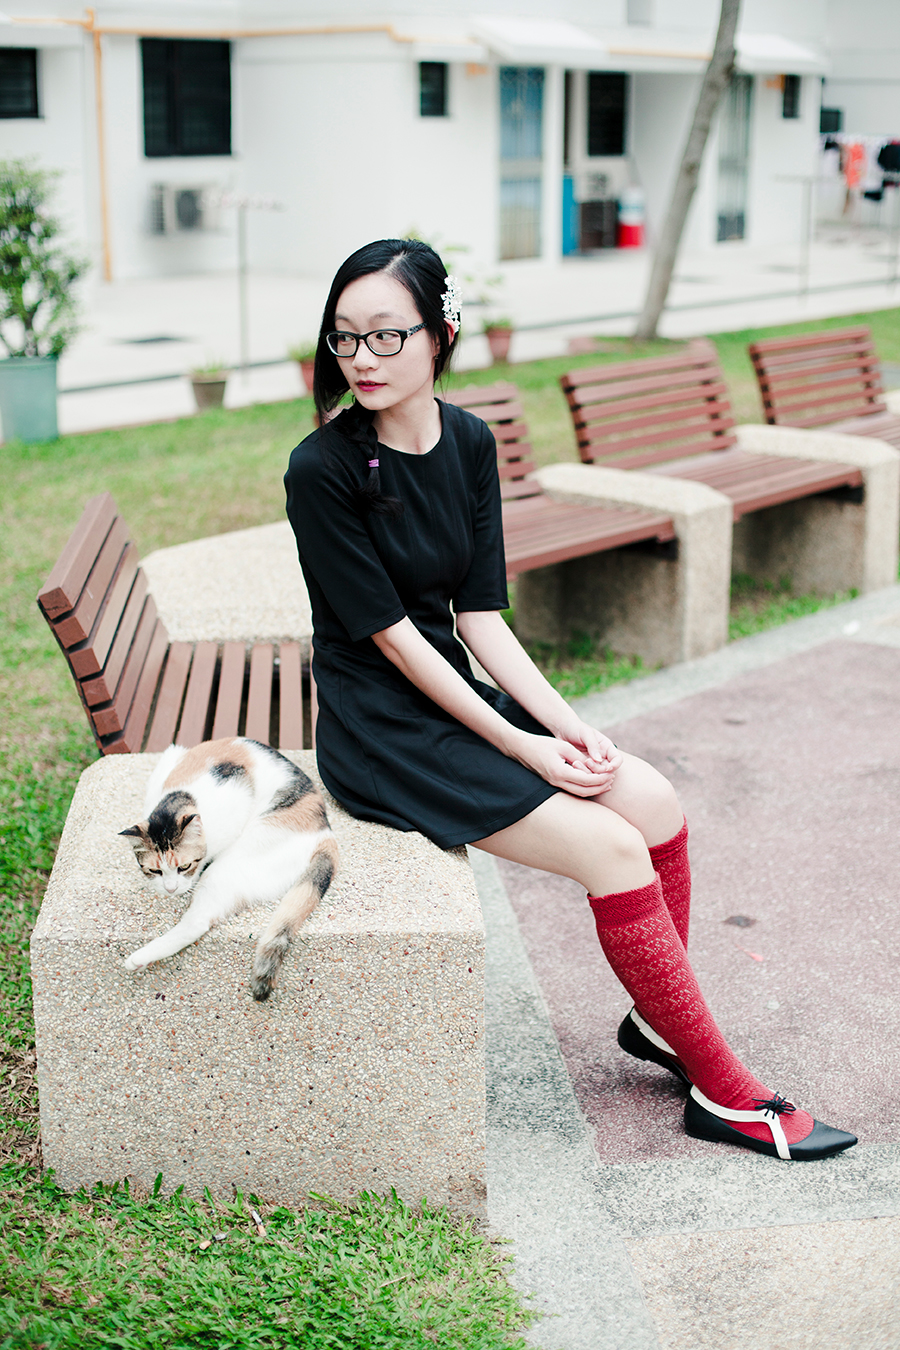 Me and Lazy Cat in my ootd: Forever 21 dress, Irresistible Me Hera Hair Comb, Urban Outfitters red lace knee socks, Something Borrowed cutout oxford flats.